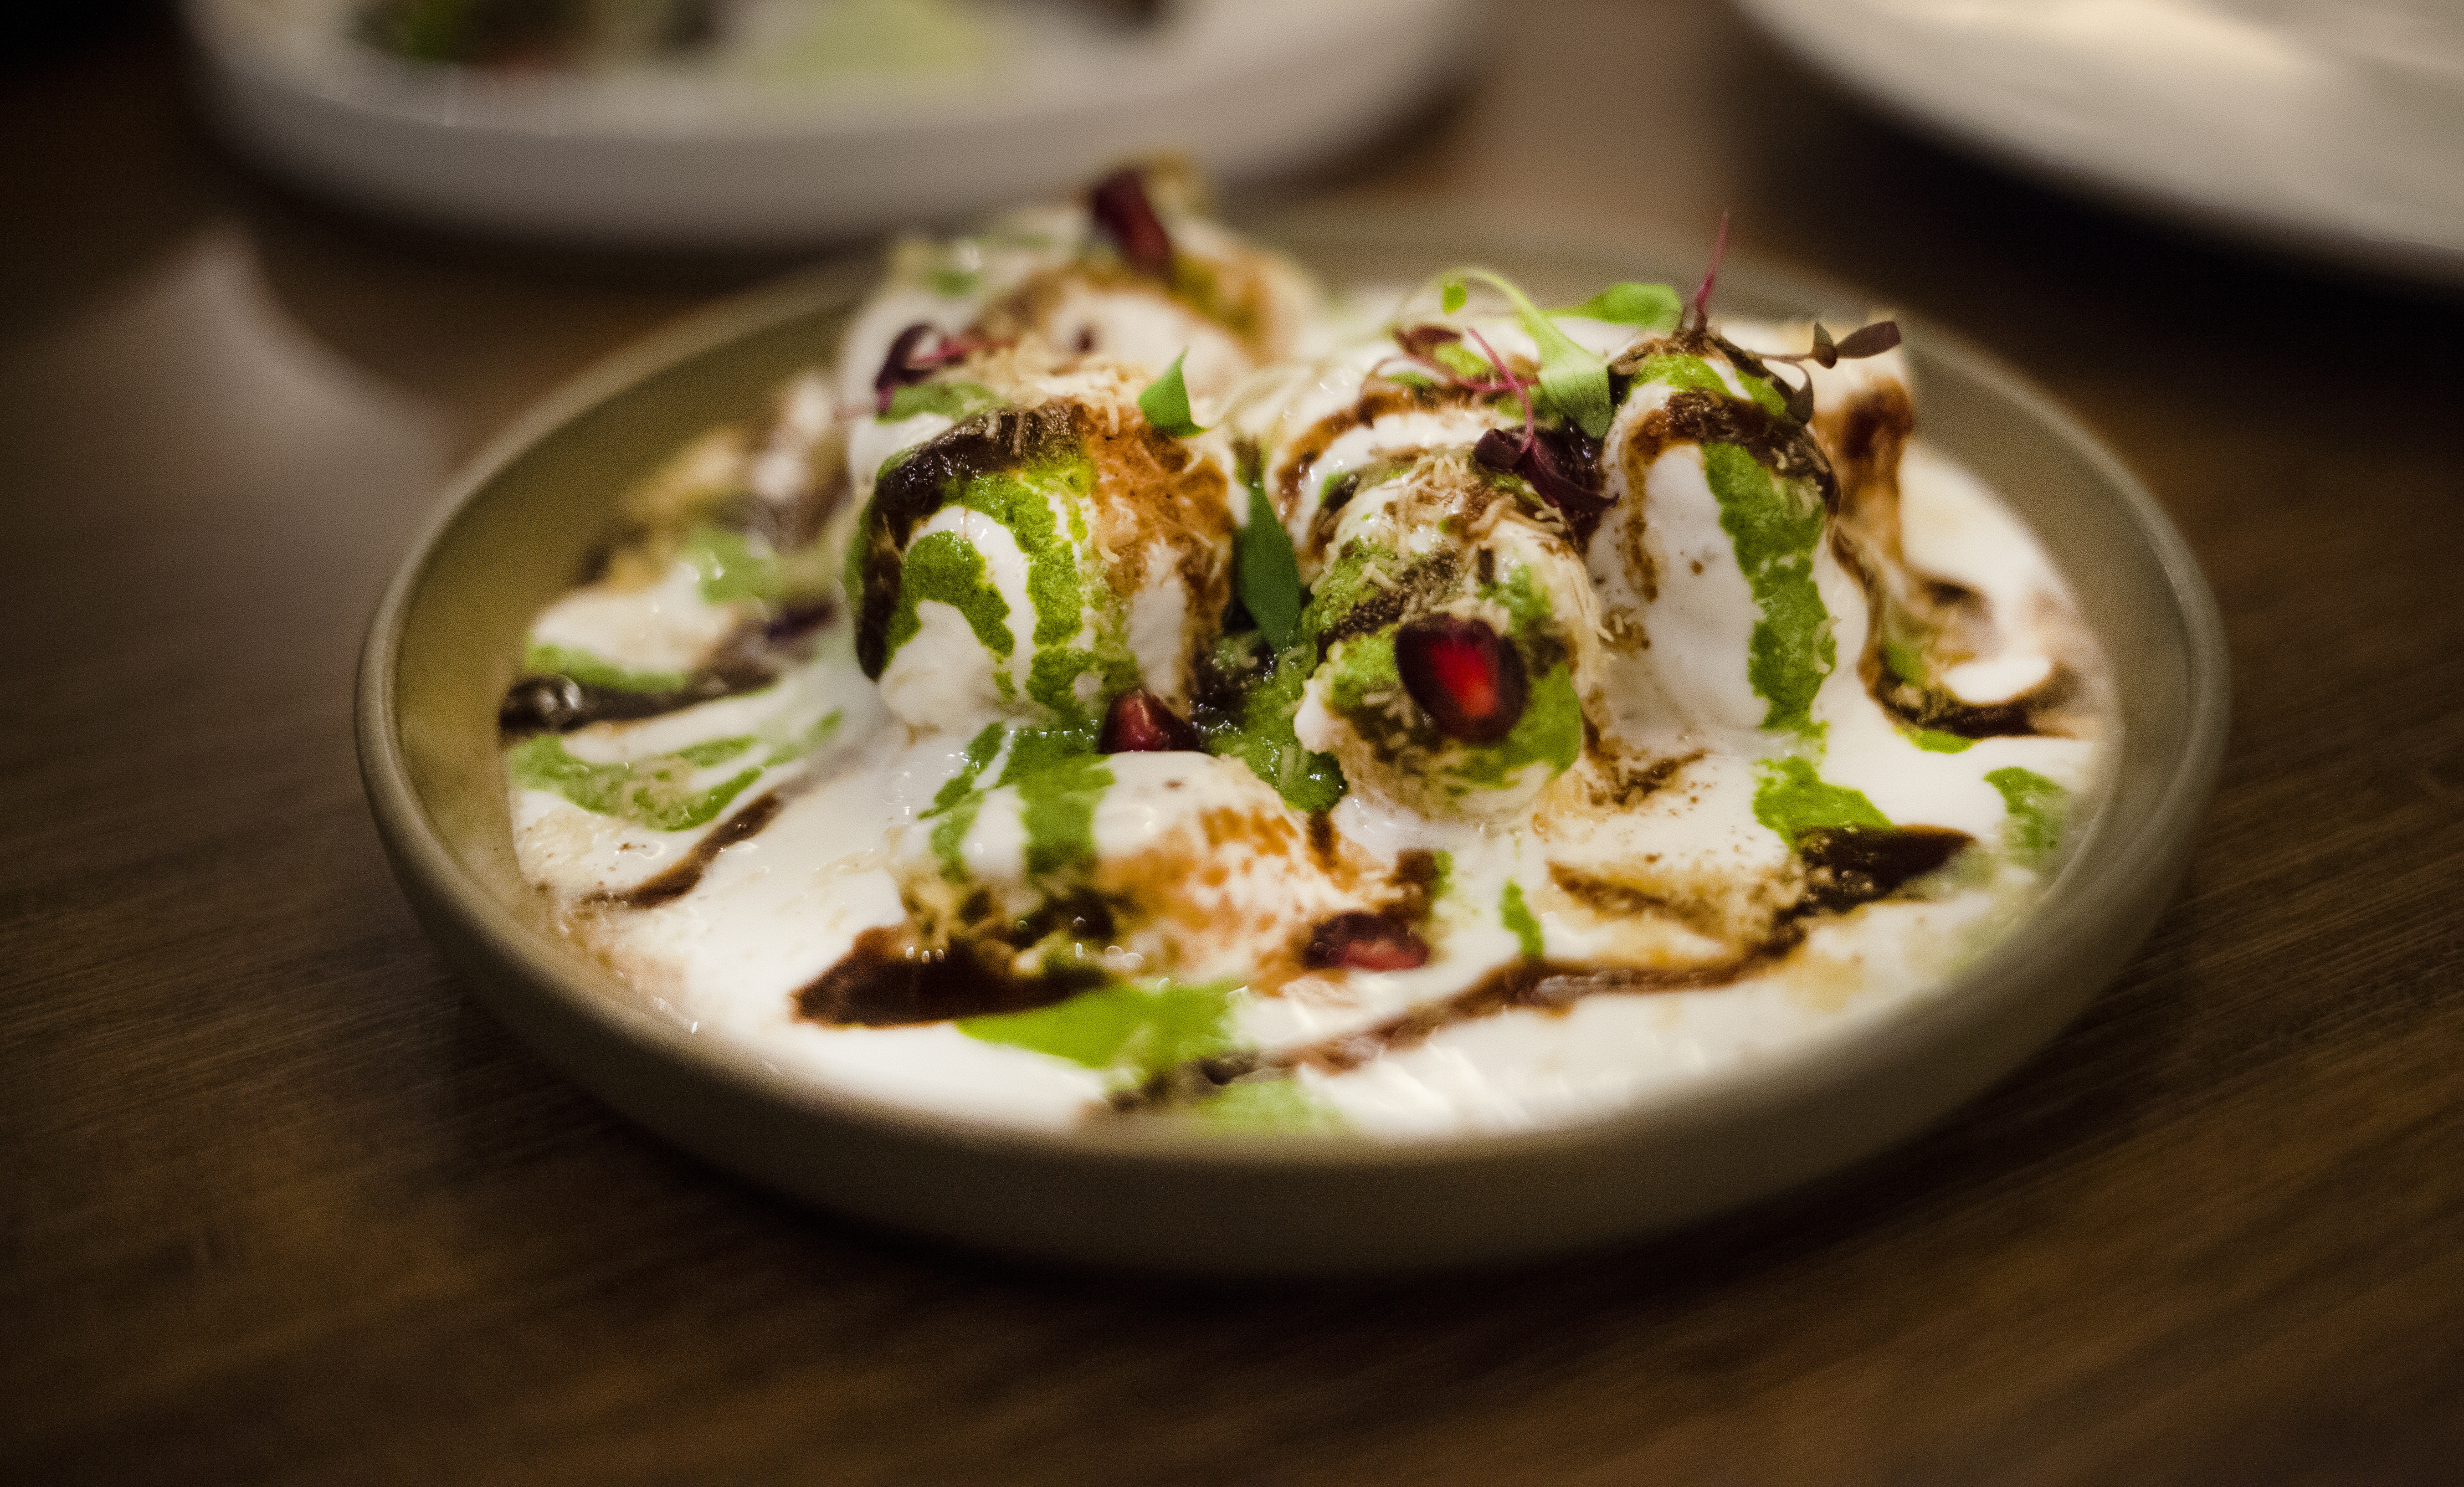 Fine Dining Indian Restaurant Kahani Hits the Spot in Chelsea: Spiced Chickpea with Sweetened Yoghurt